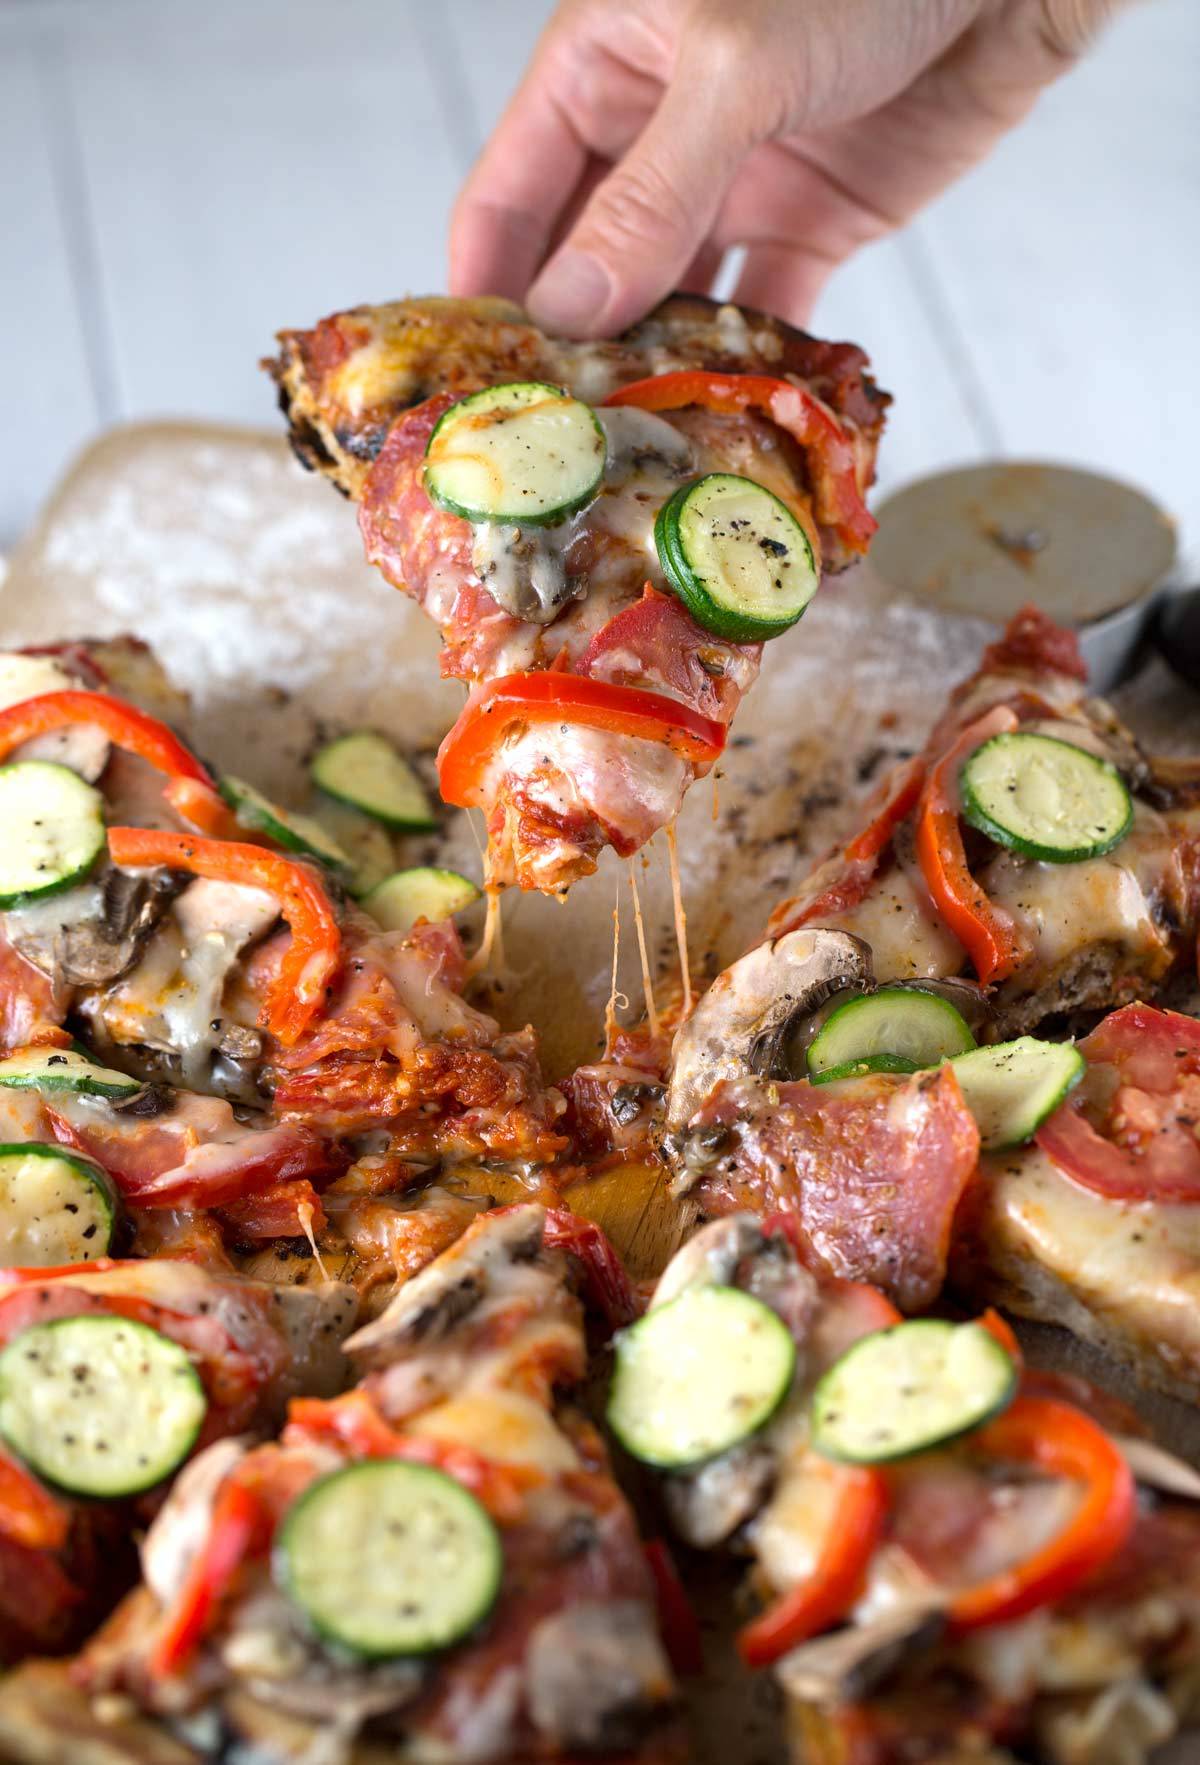 BARBECUE GRILLED PEPPERONI PIZZA WITH VEGETABLES